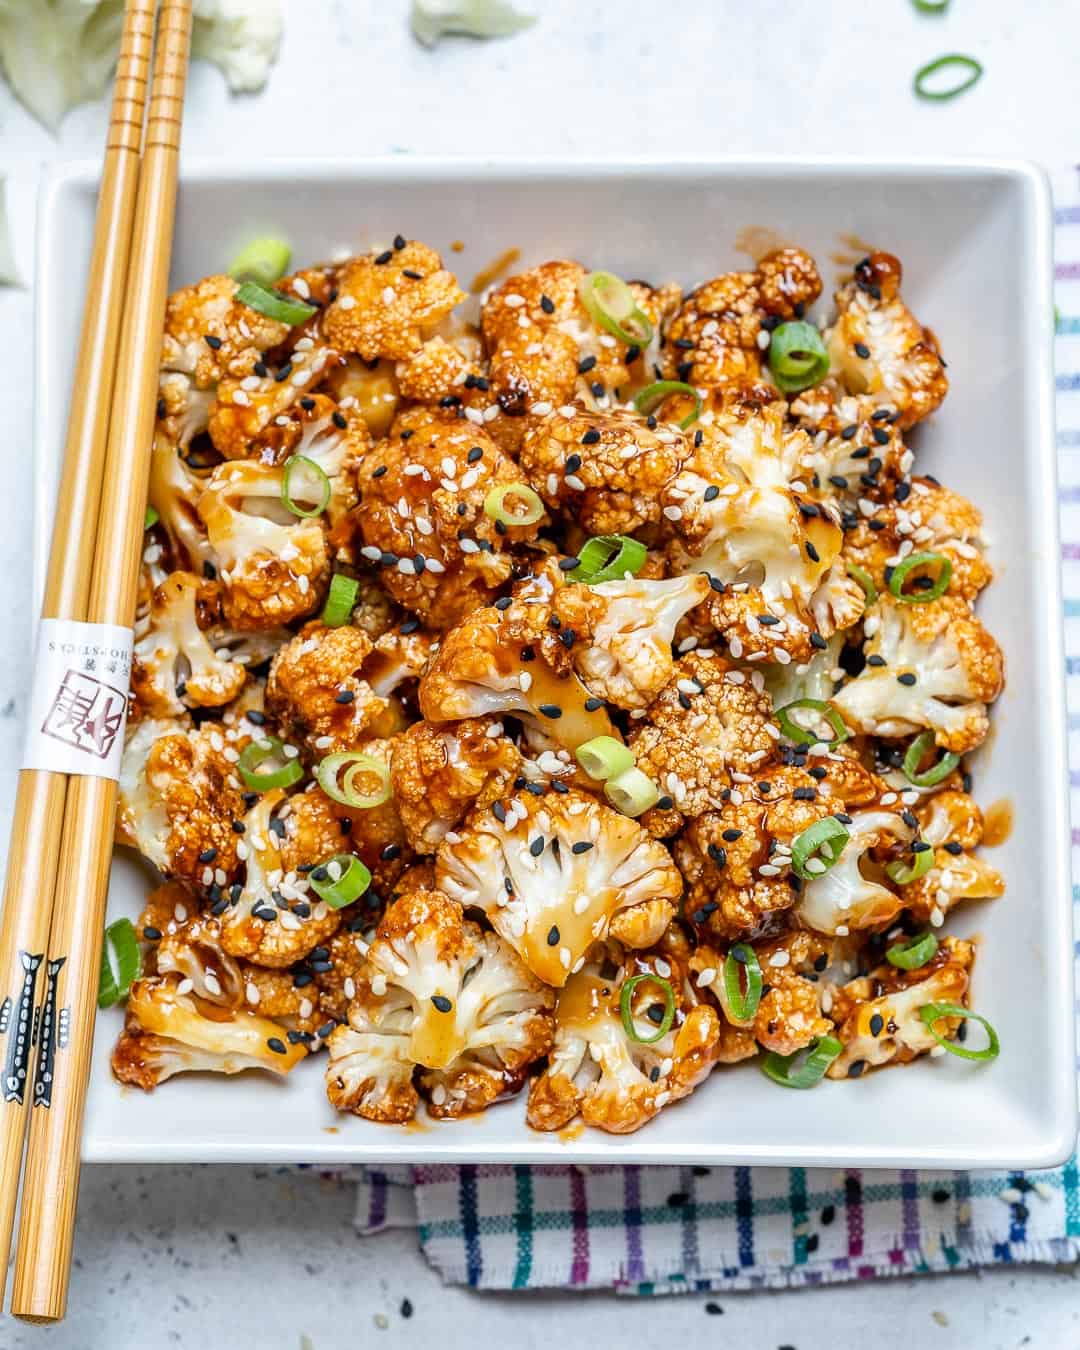 Sweet and Spicy Baked Cauliflower